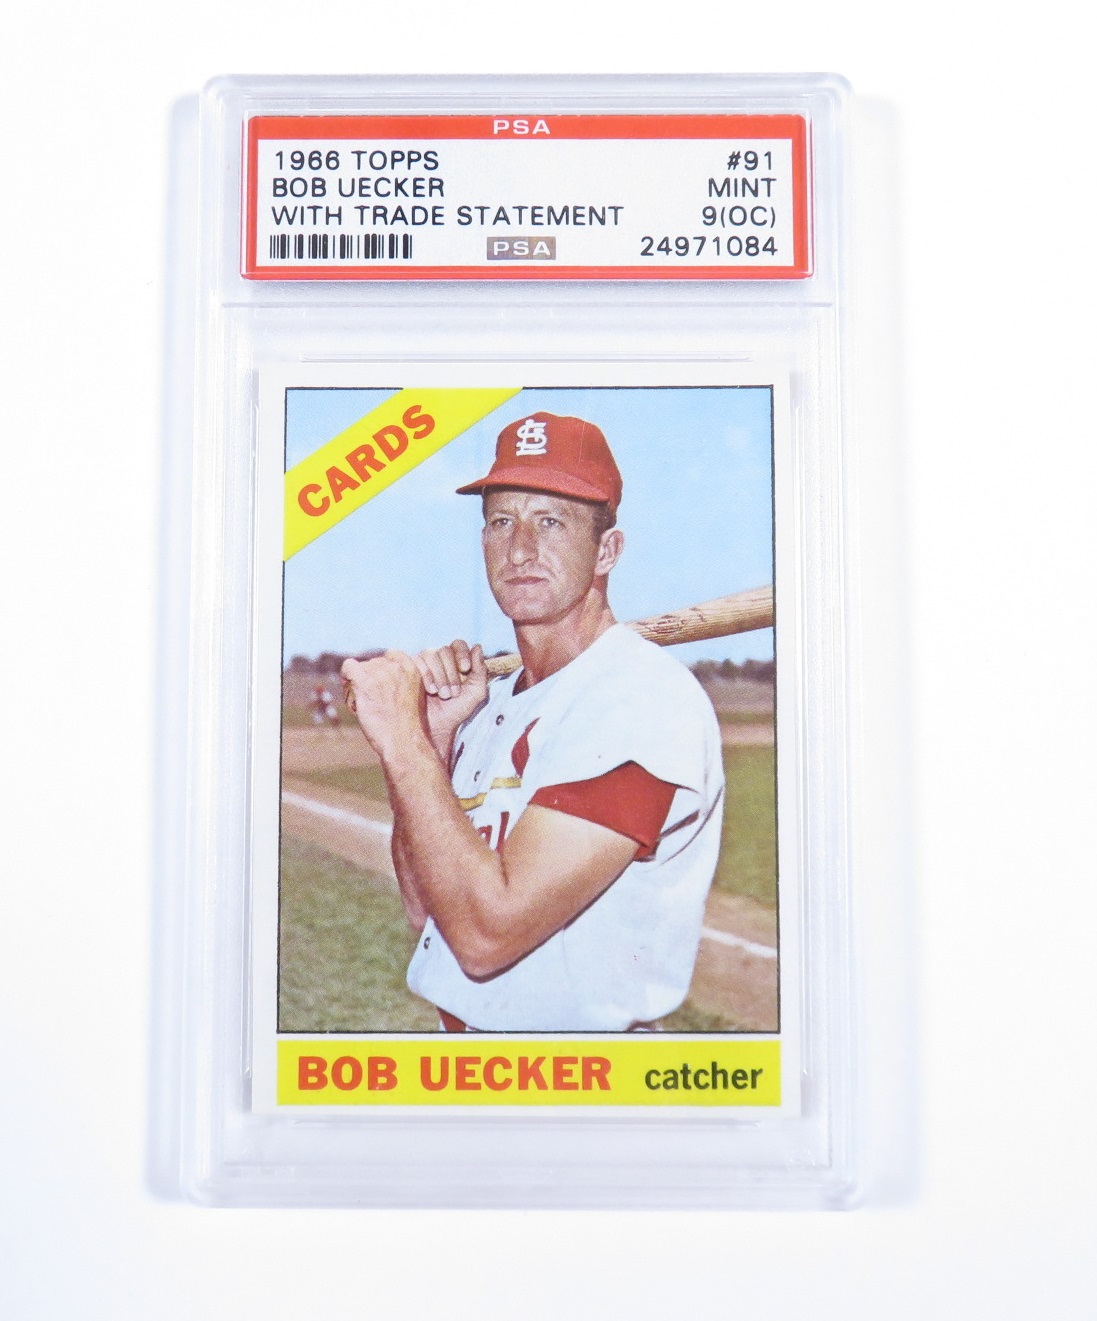 Bob Uecker With Trade Statement 1966 Topps #91 MINT 9(OC) PSA Graded Card